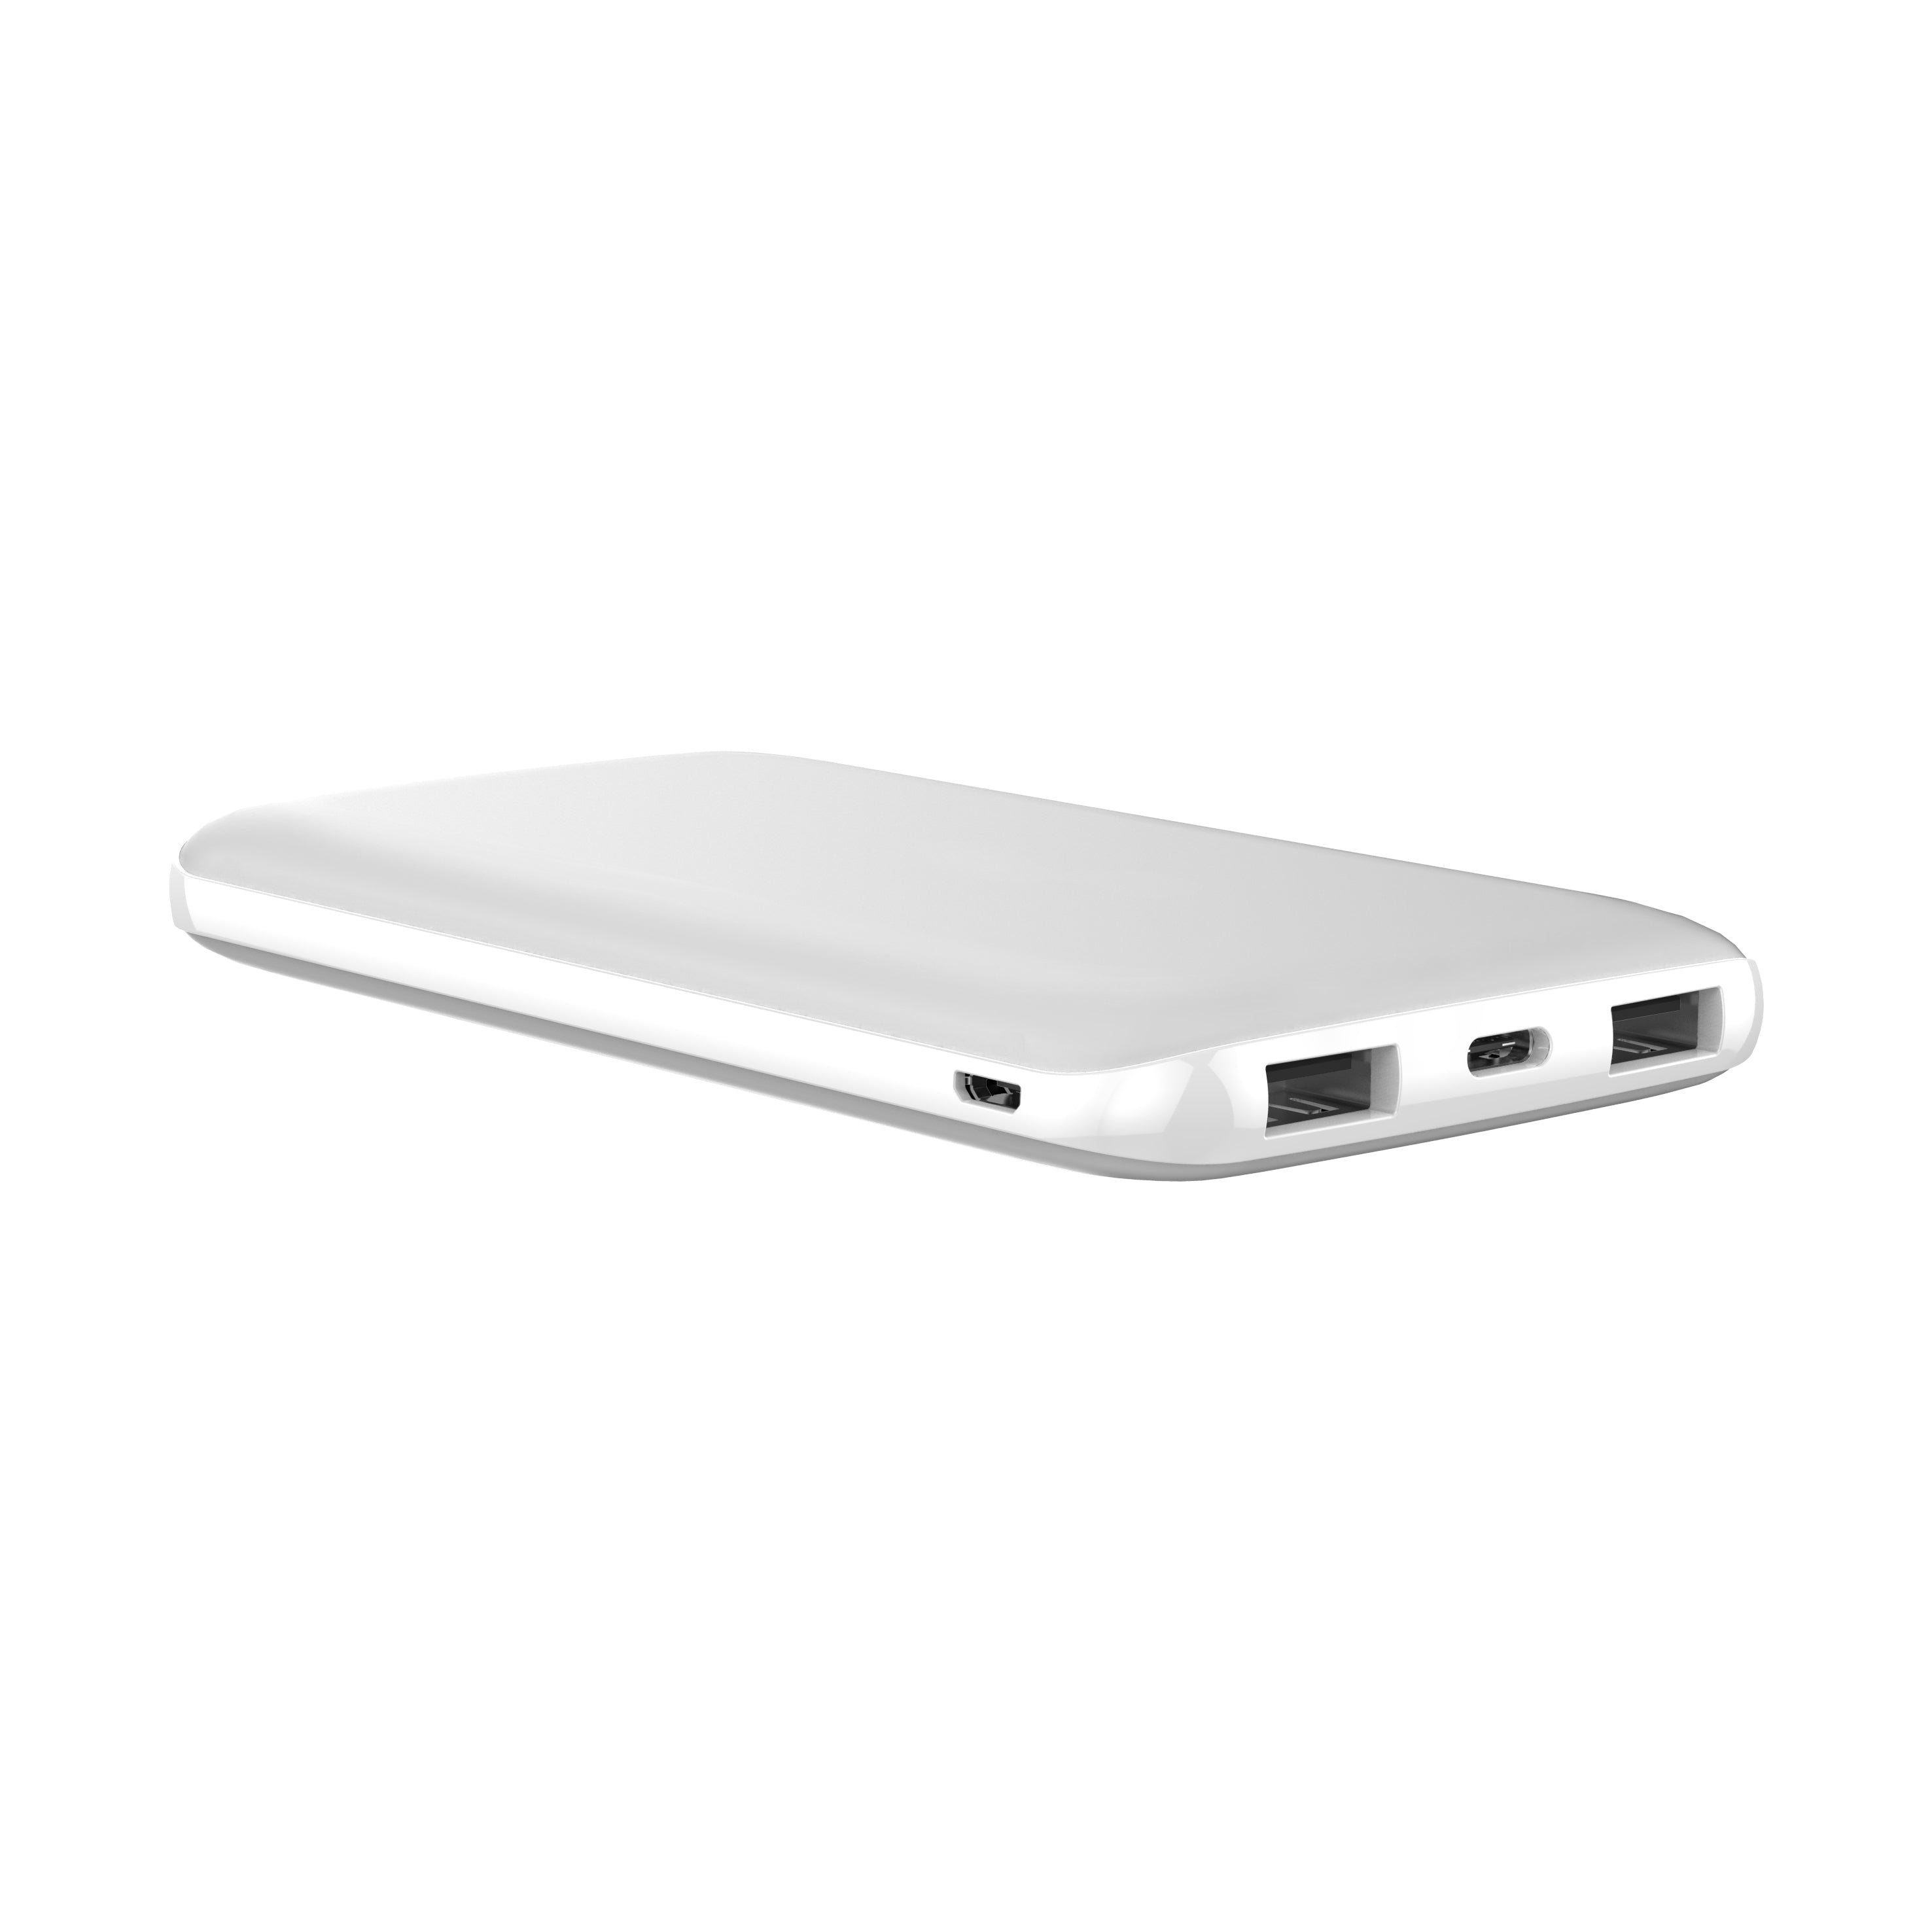 REF Power Fast Charge "C-Port" Portable Power Bank in White